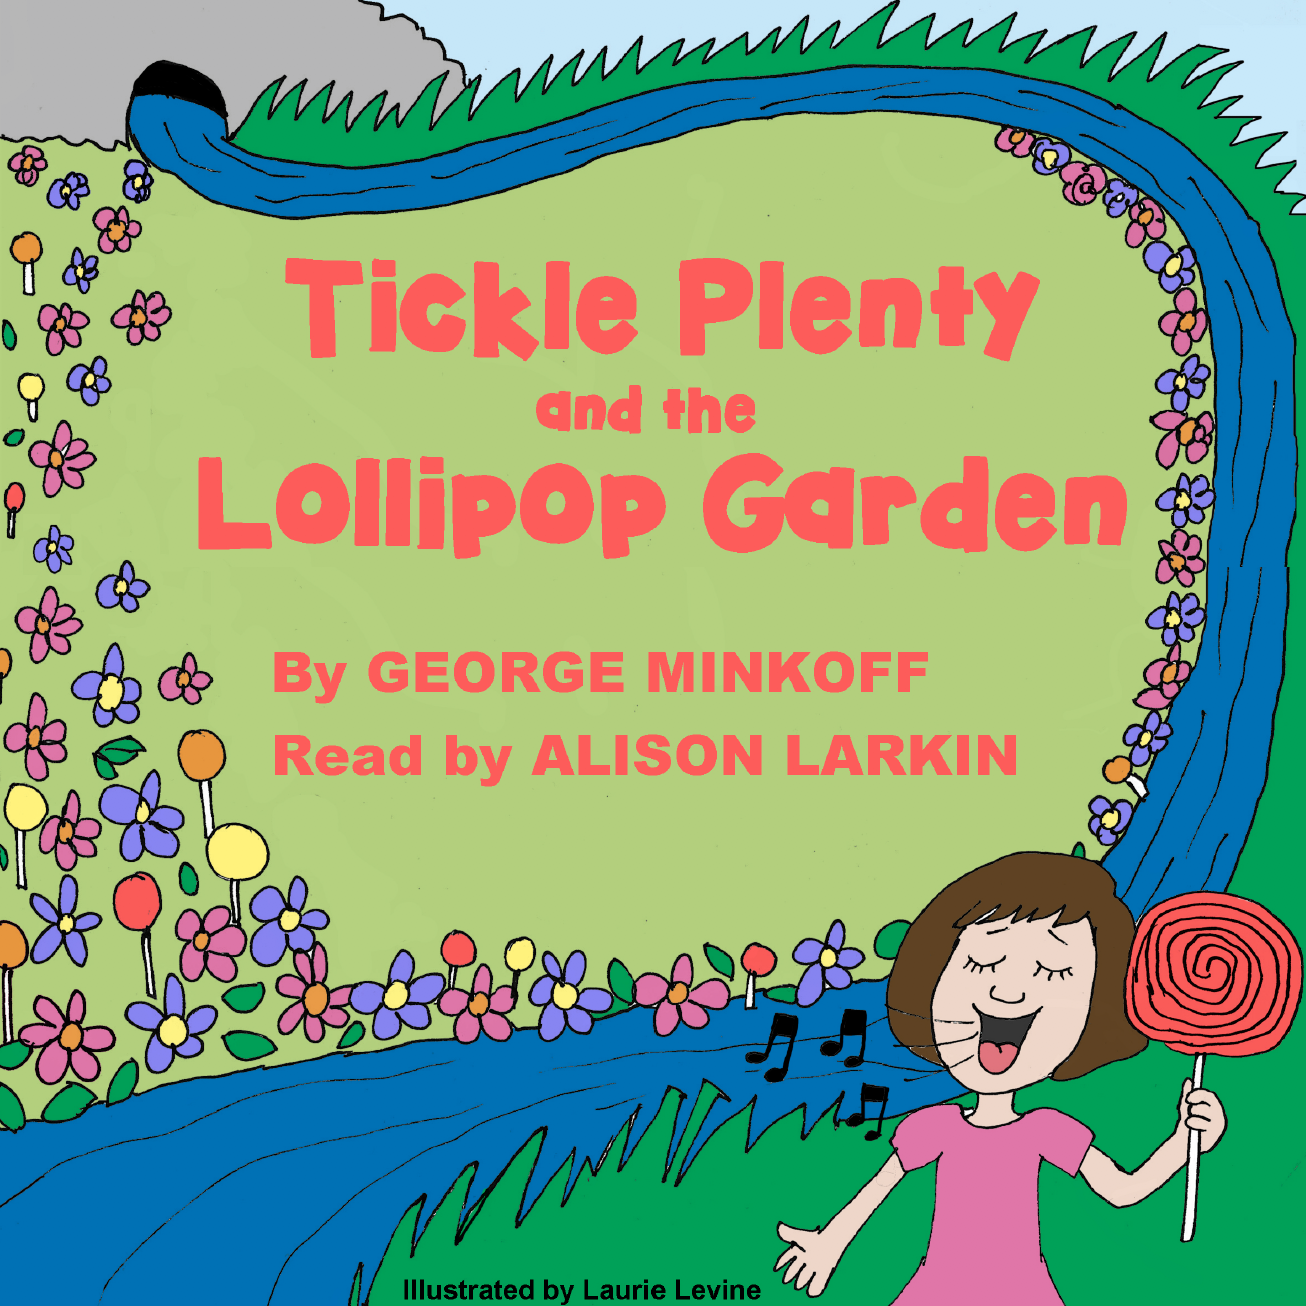 Tickle Plenty and the Lollipop Garden, by George Minkoff. Read by Alison Larkin. Illustrated by Laurie Levine.